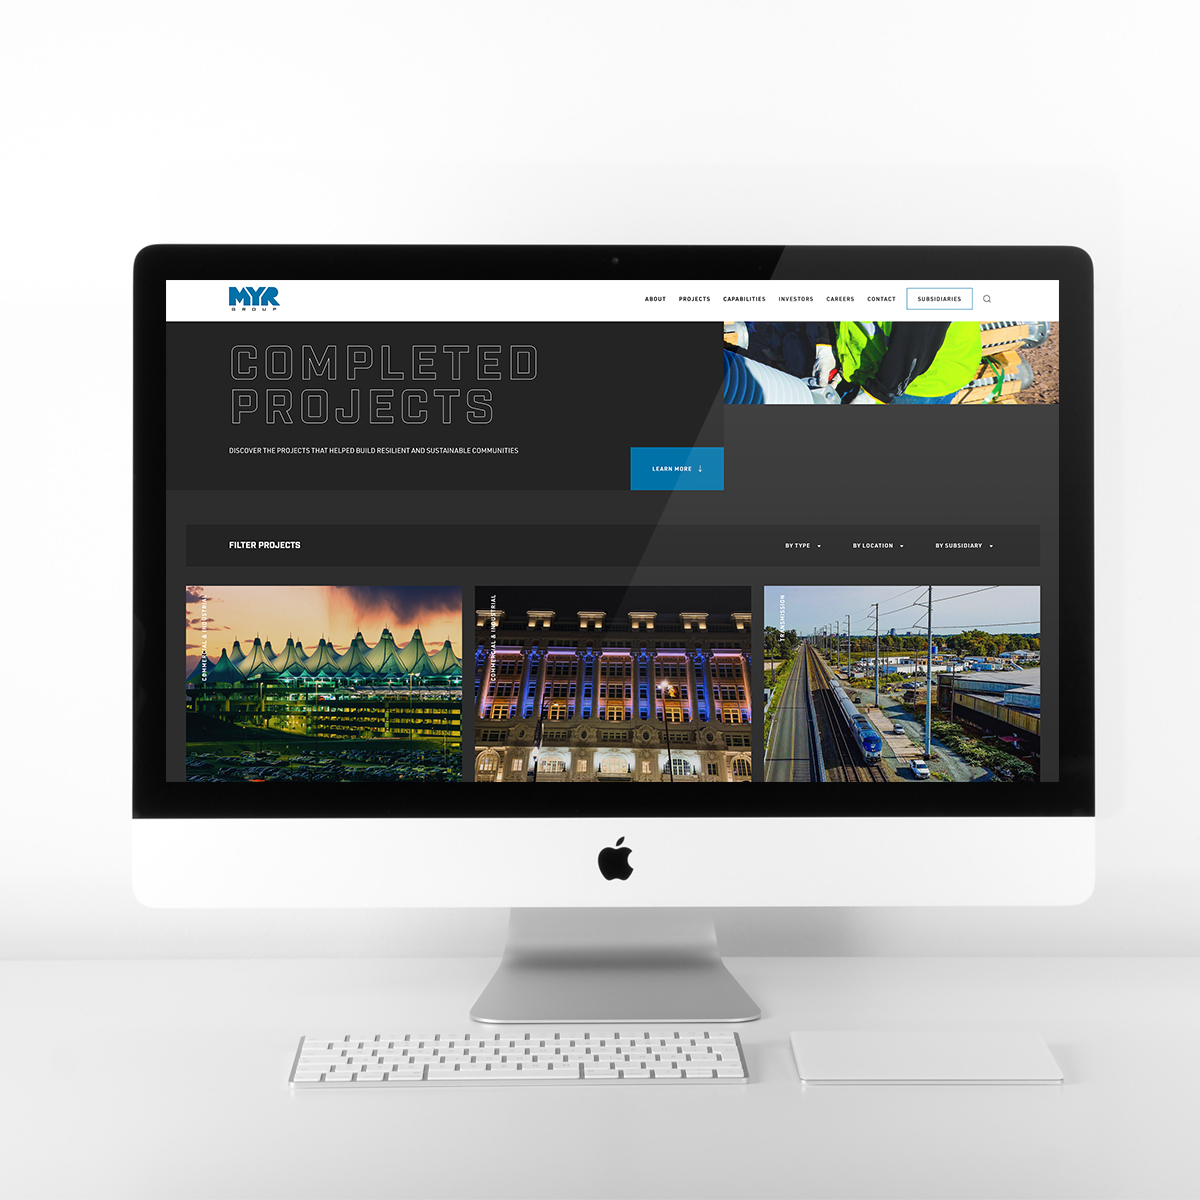 Studiothink is a Surrey web design and branding agency